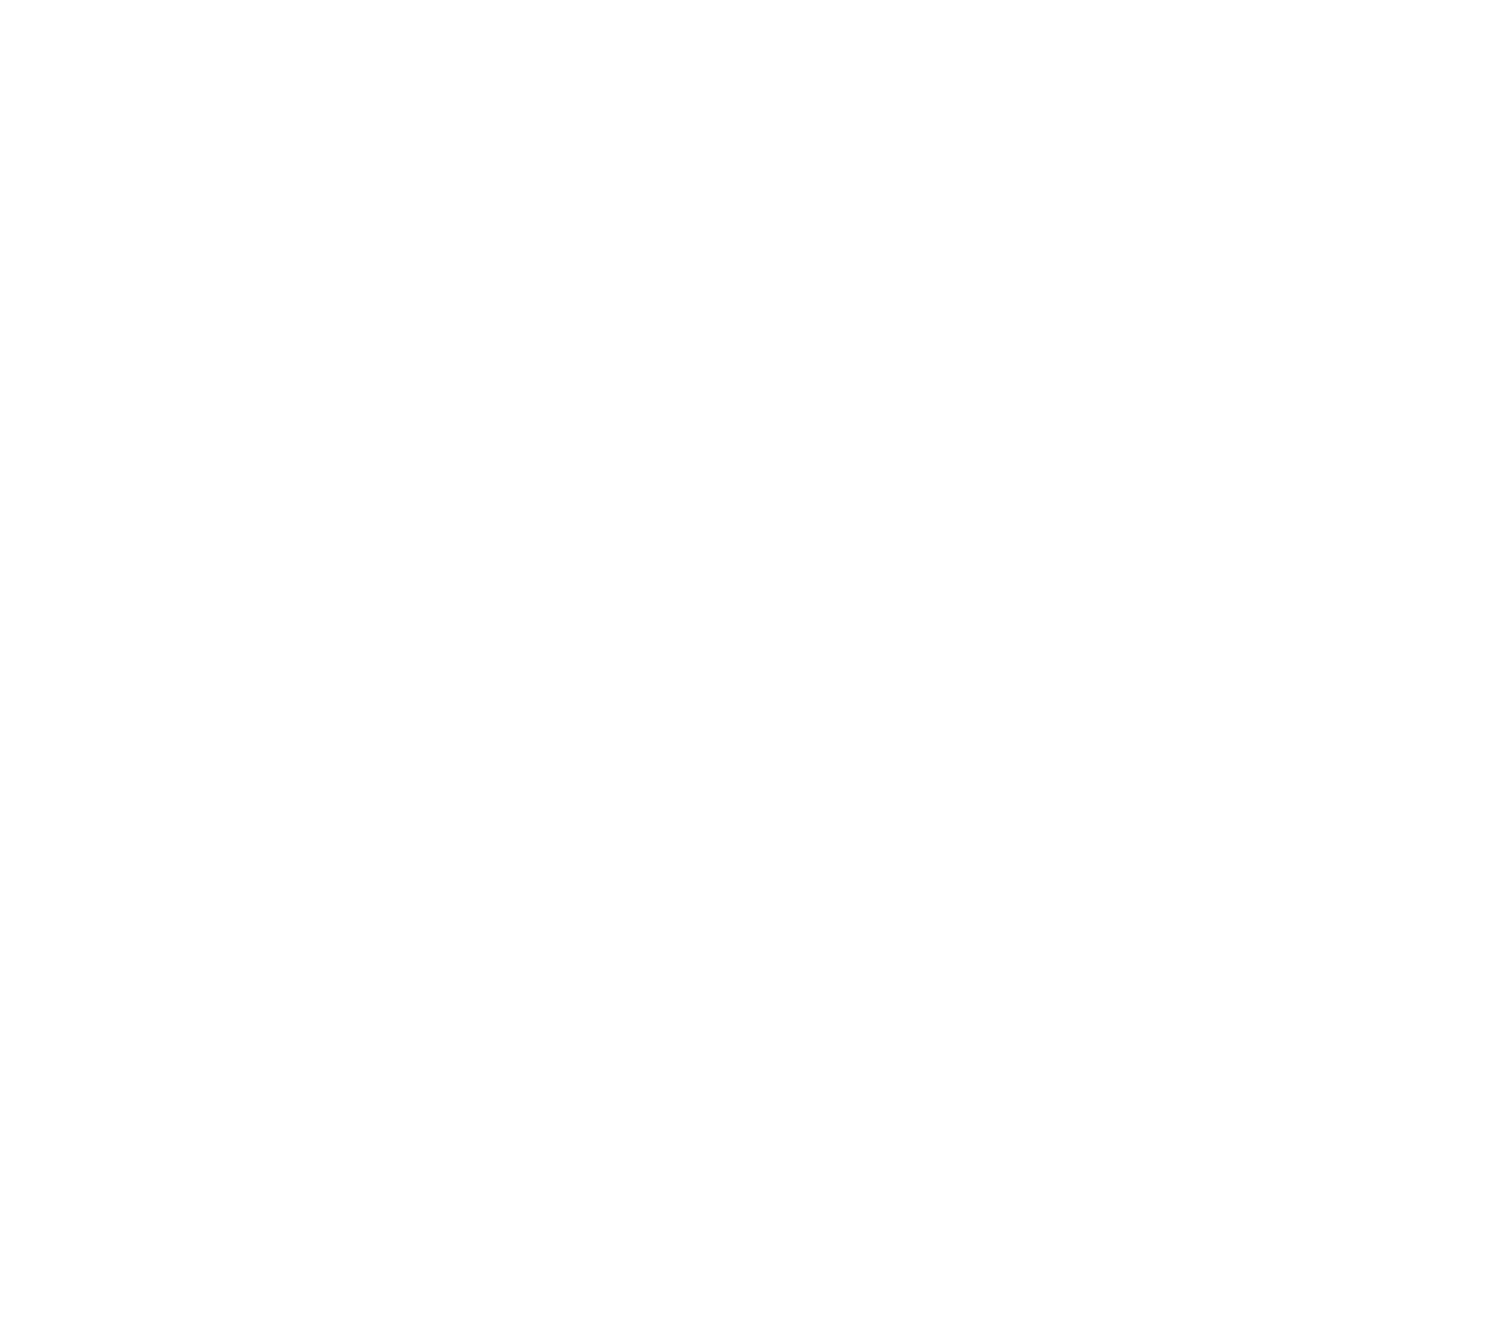 House Democratic Campaign Committee&mdash;HDCC